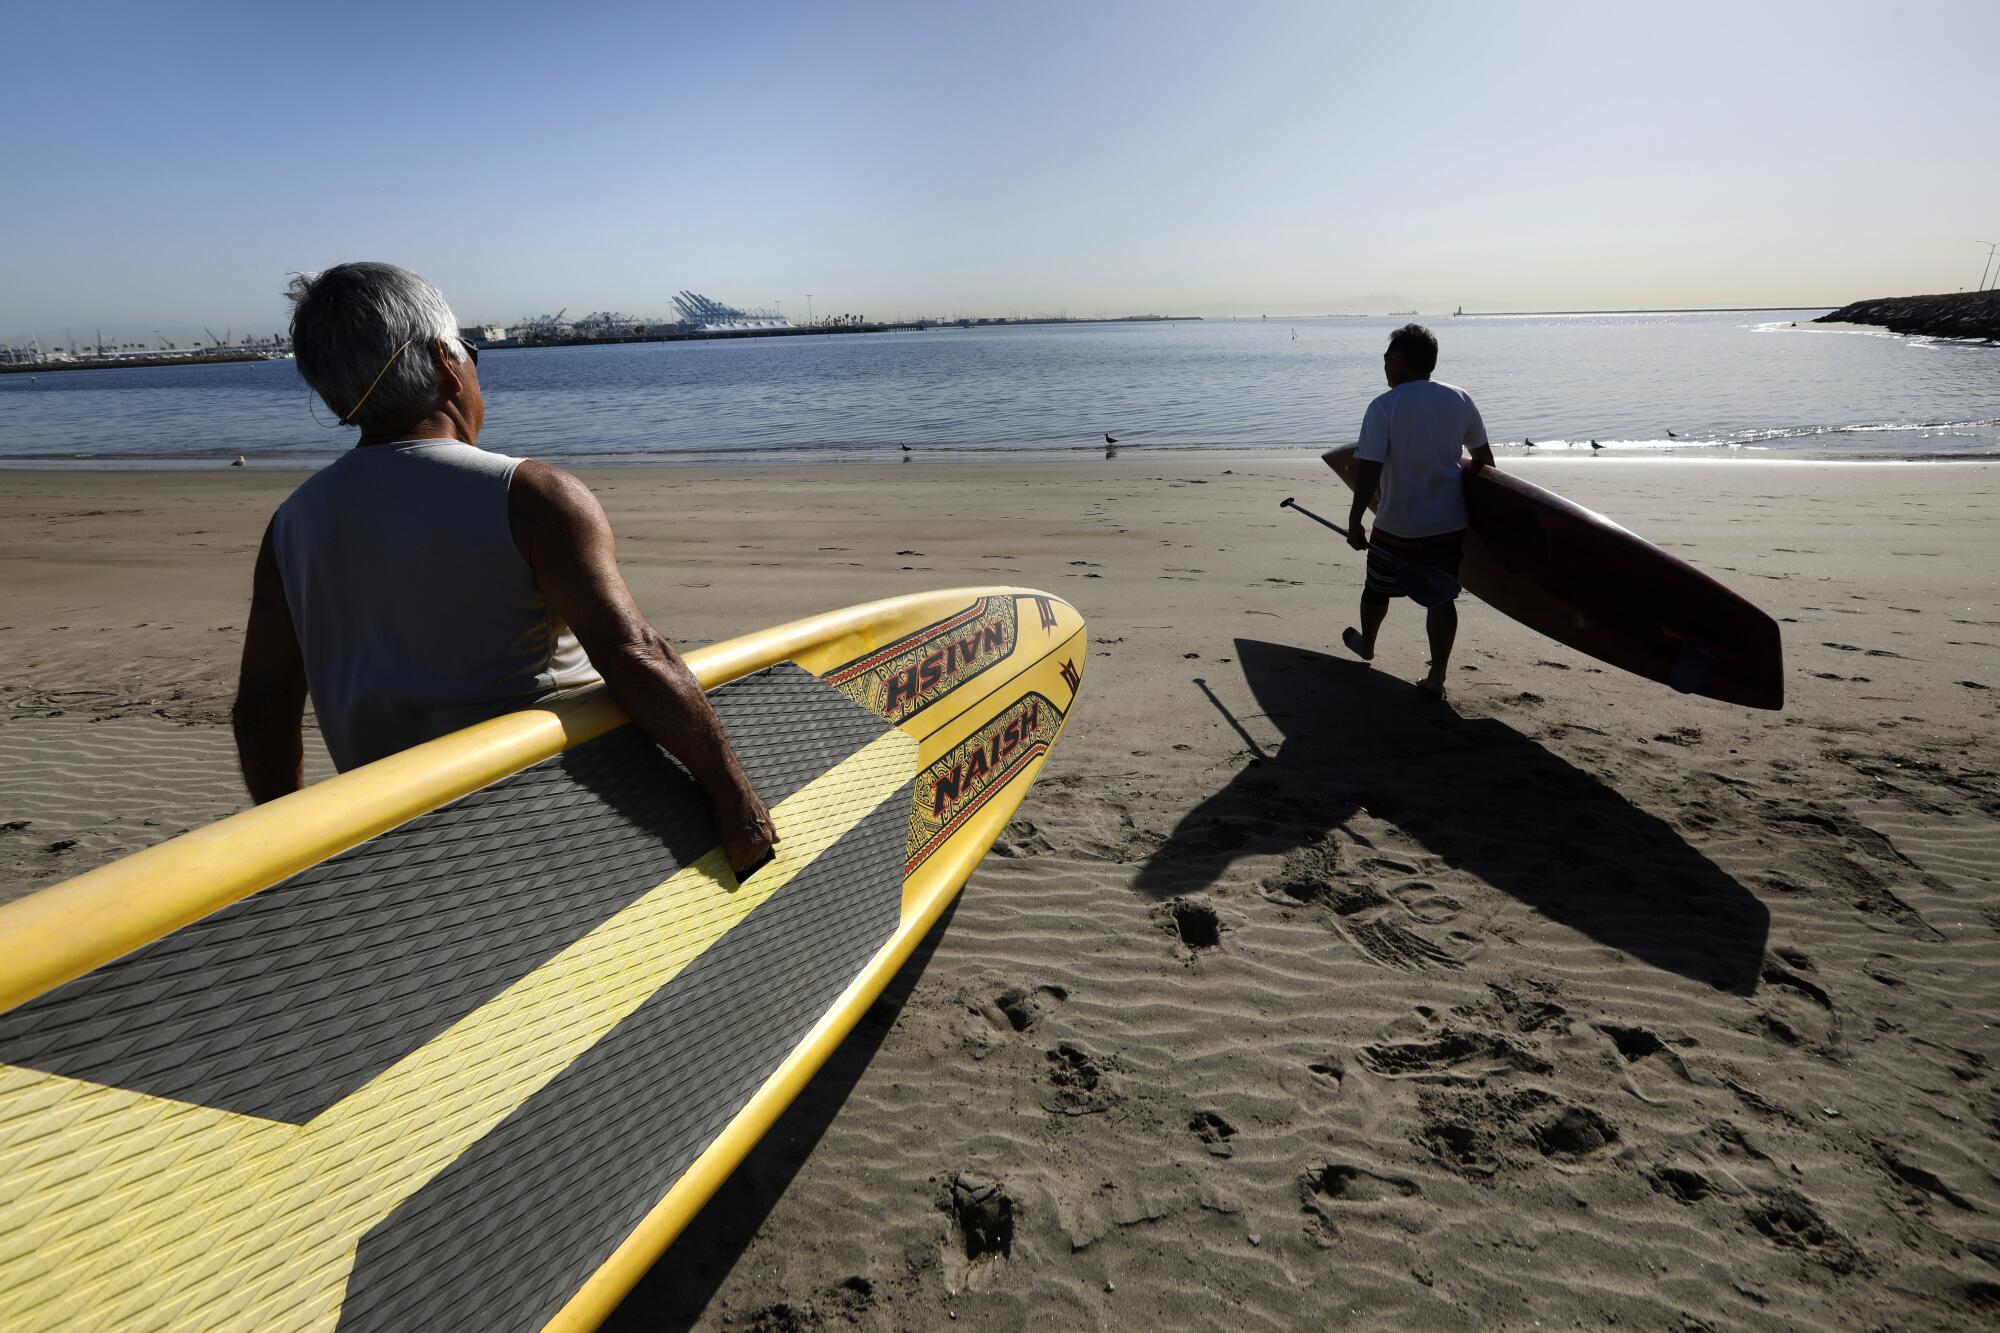 Glenn Tawa, of San Pedro, left, and Kenny Miyamoto, of Torrance, head out on their paddle boards at Cabrillo Beach